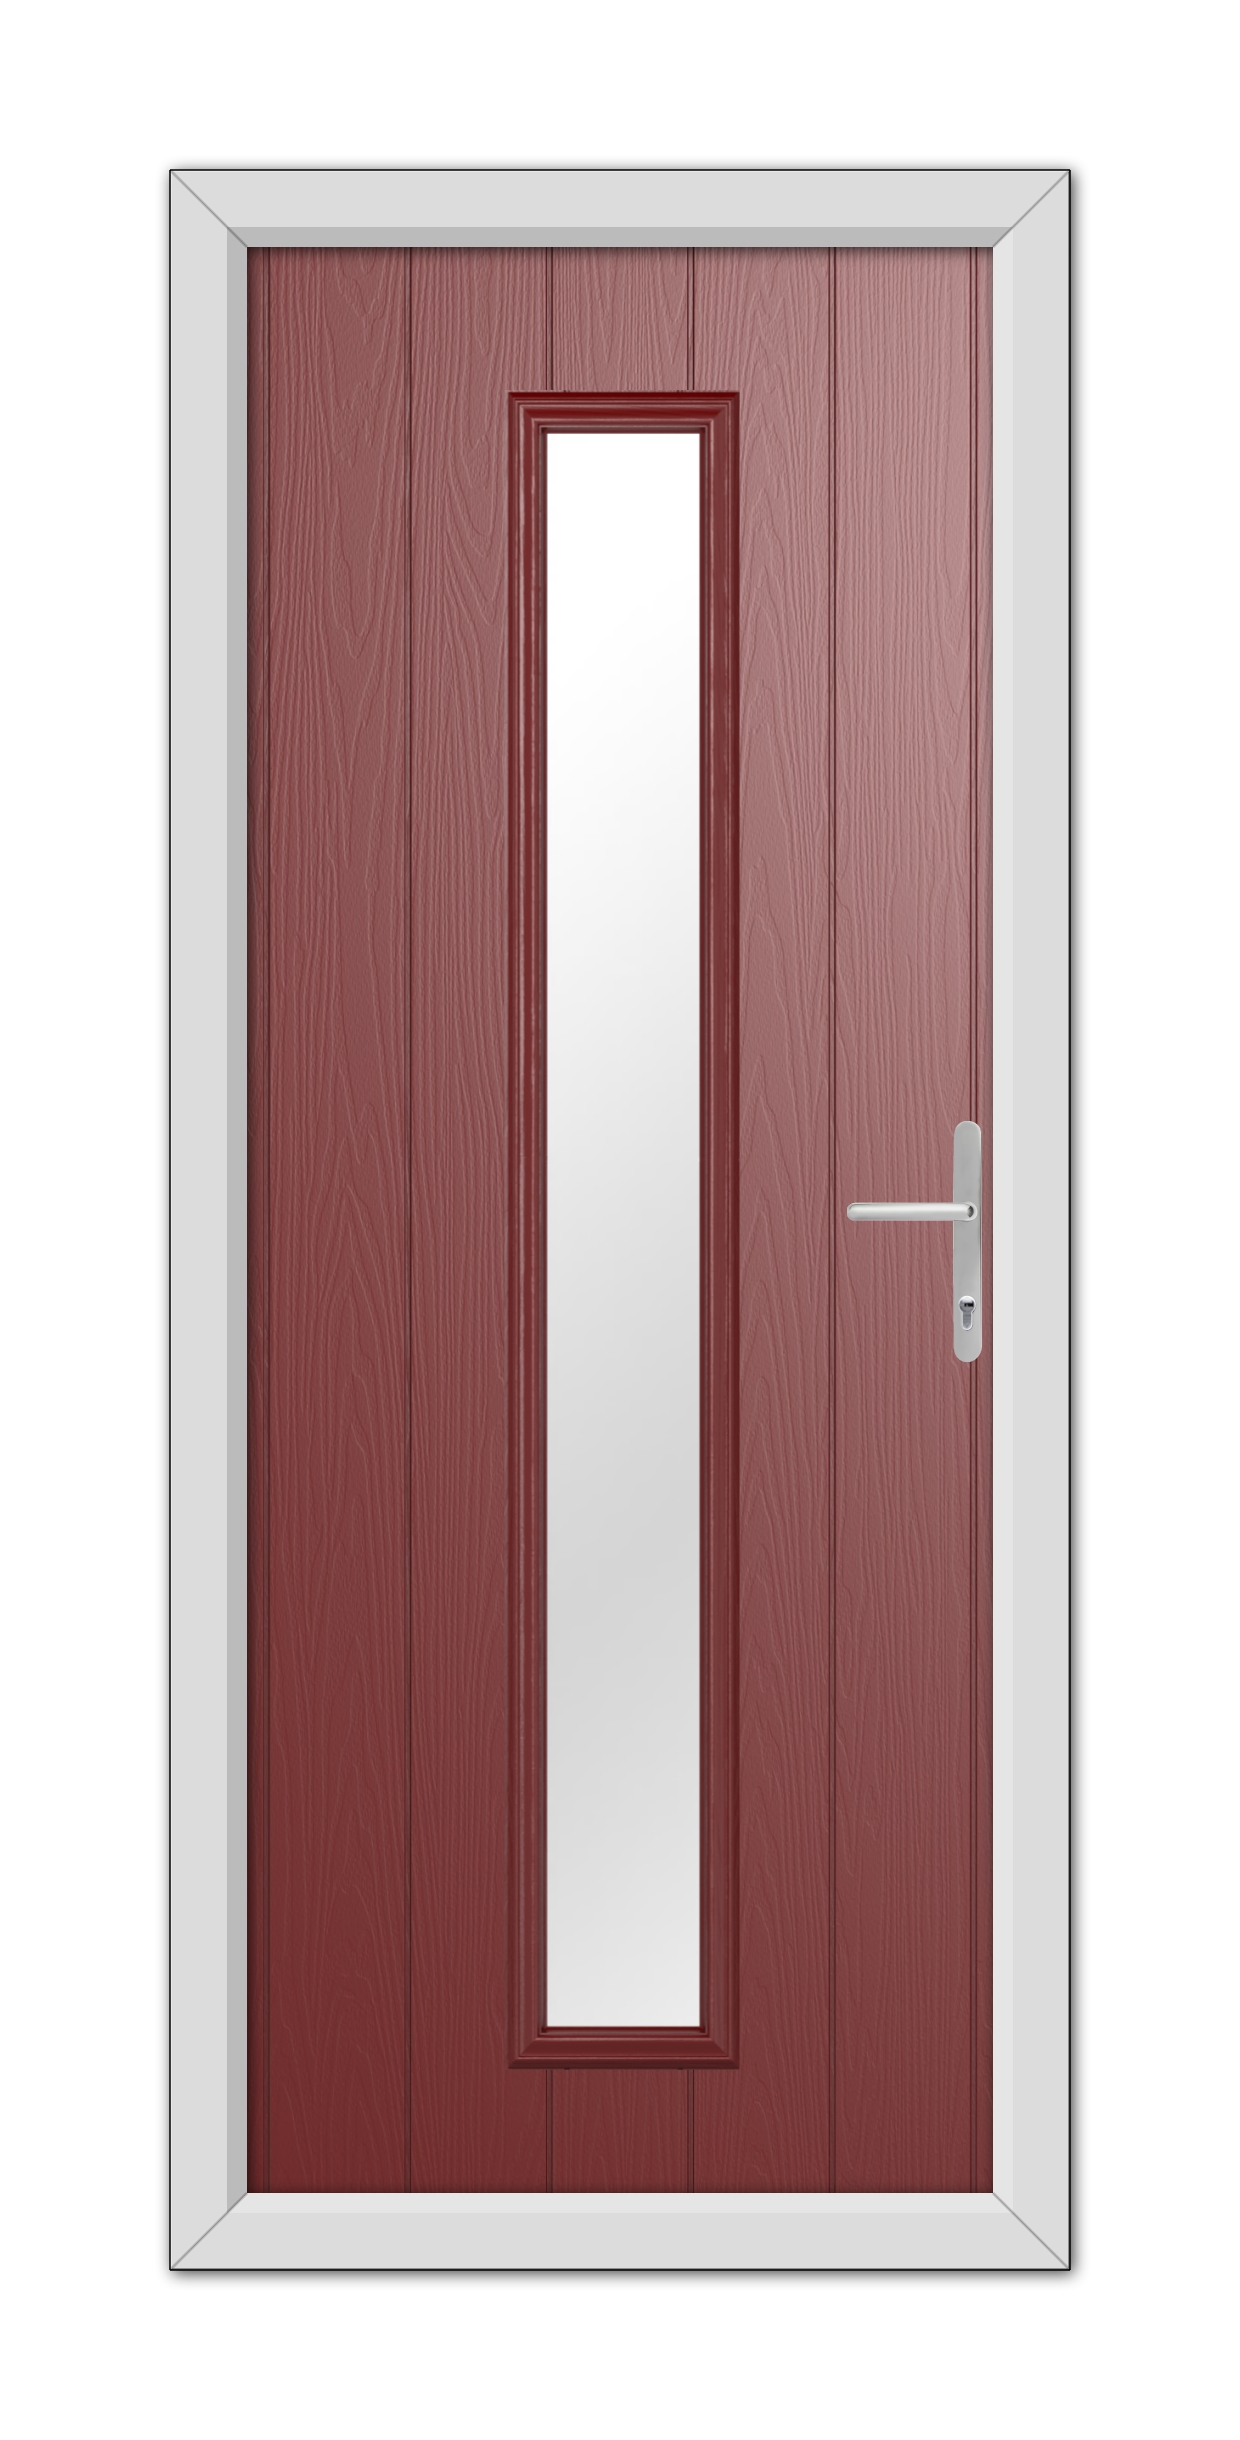 A modern Red Rutland Composite Door 48mm Timber Core with a vertical glass panel and a white metallic handle, set in a gray frame.